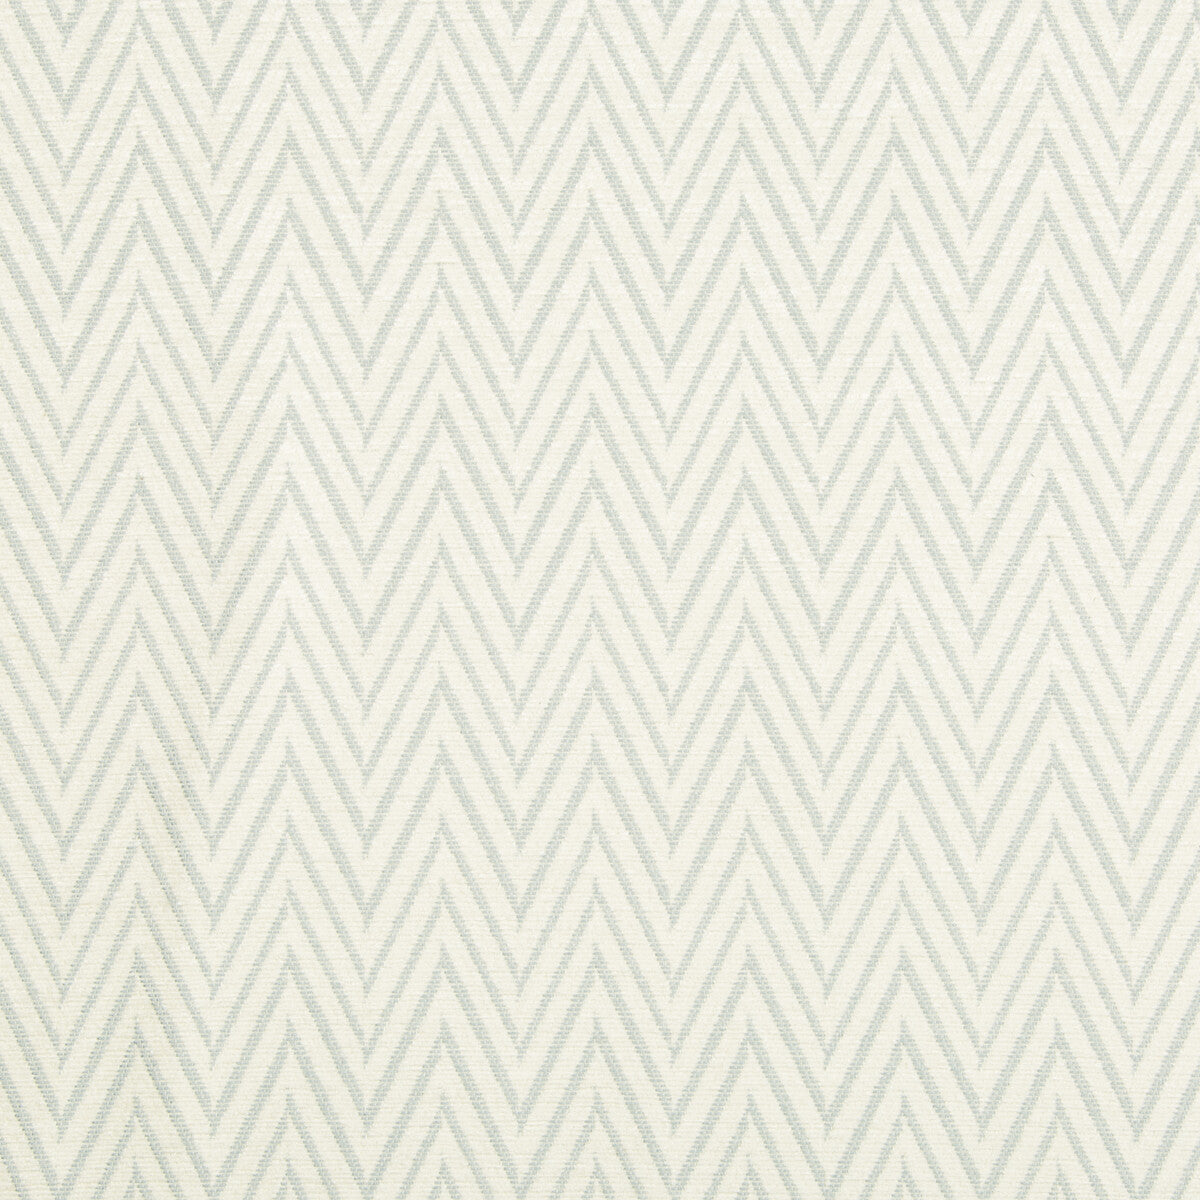 Kravet Contract fabric in 34743-15 color - pattern 34743.15.0 - by Kravet Contract in the Incase Crypton Gis collection